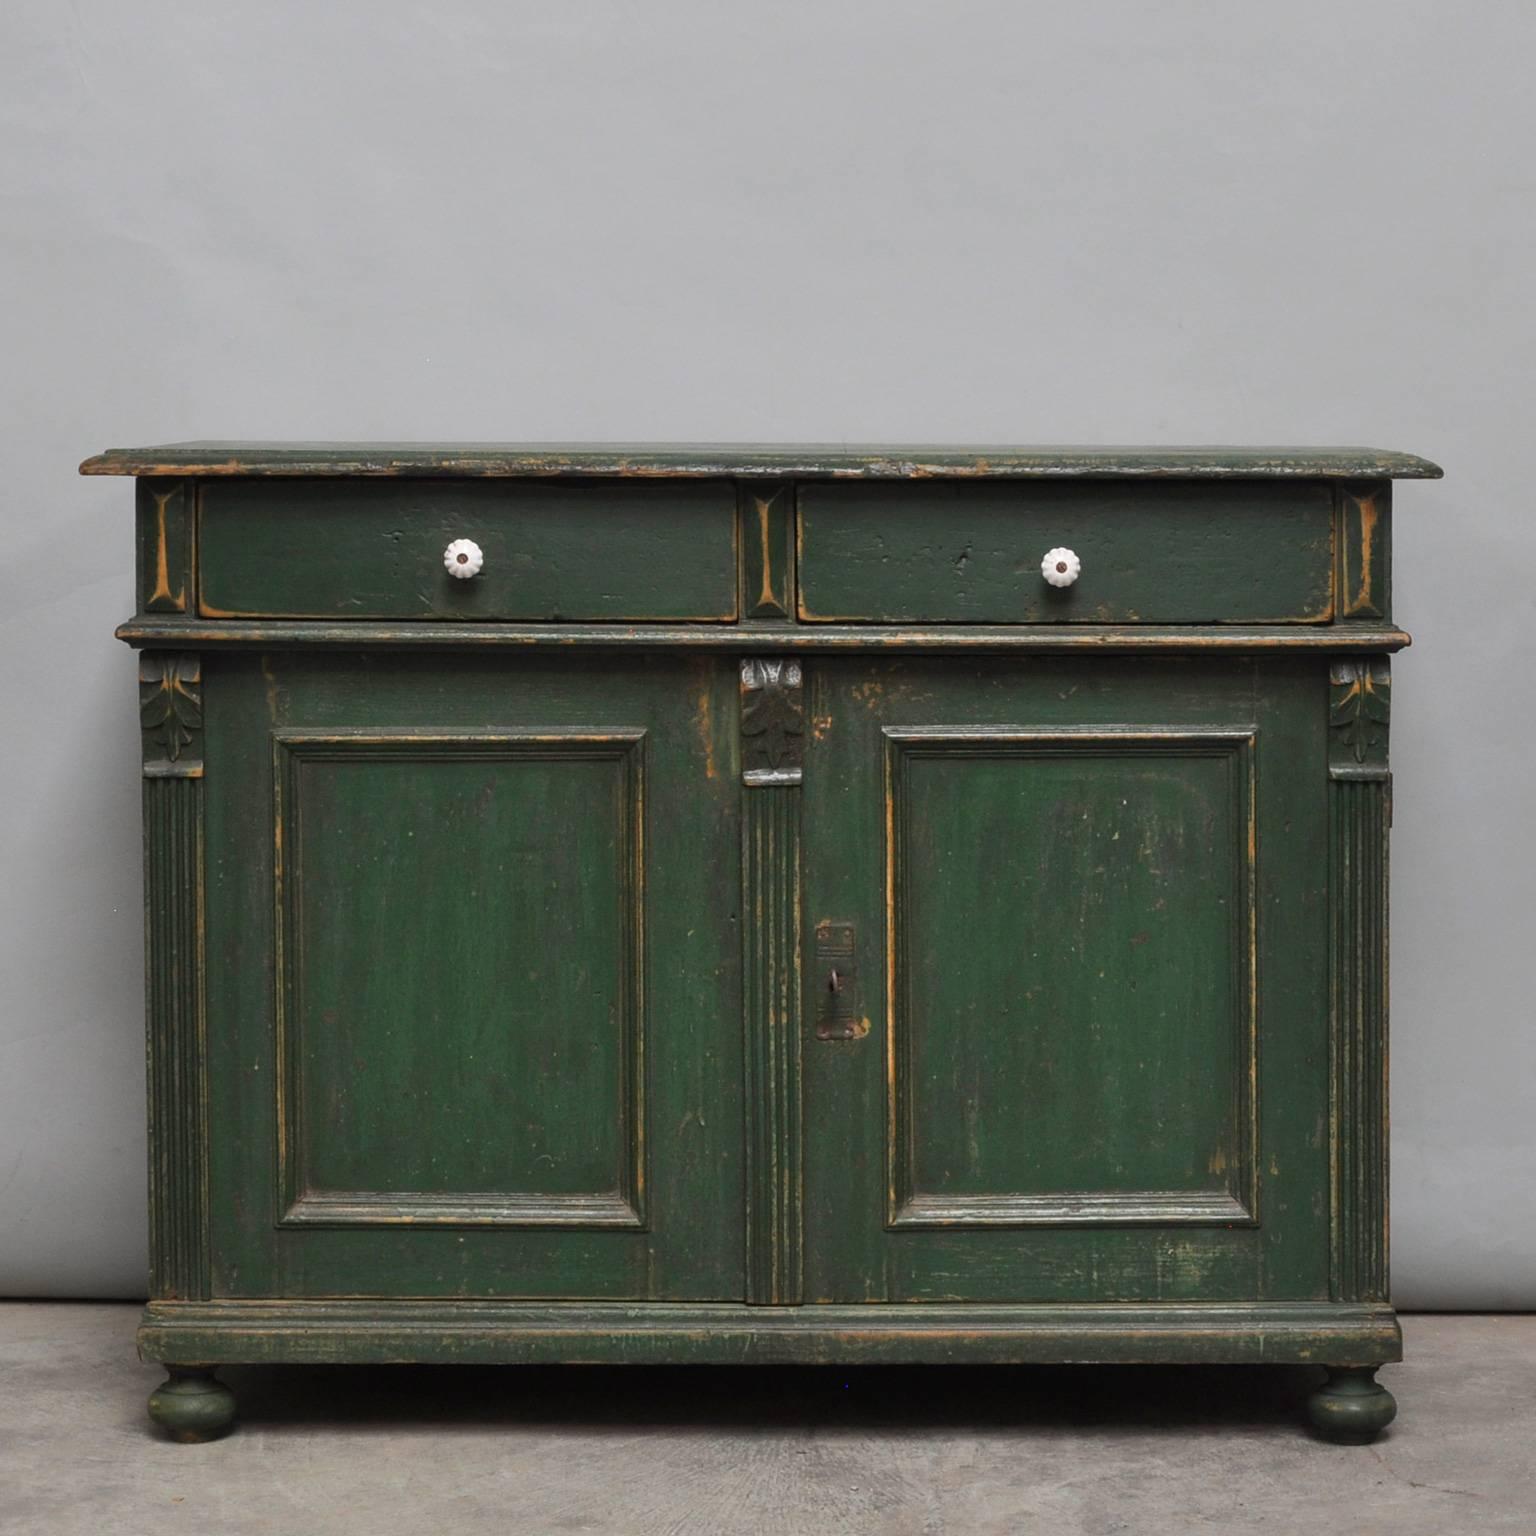 Dresser made of pine. Produced in the 1930s with two drawers and a shelf. Original paint.